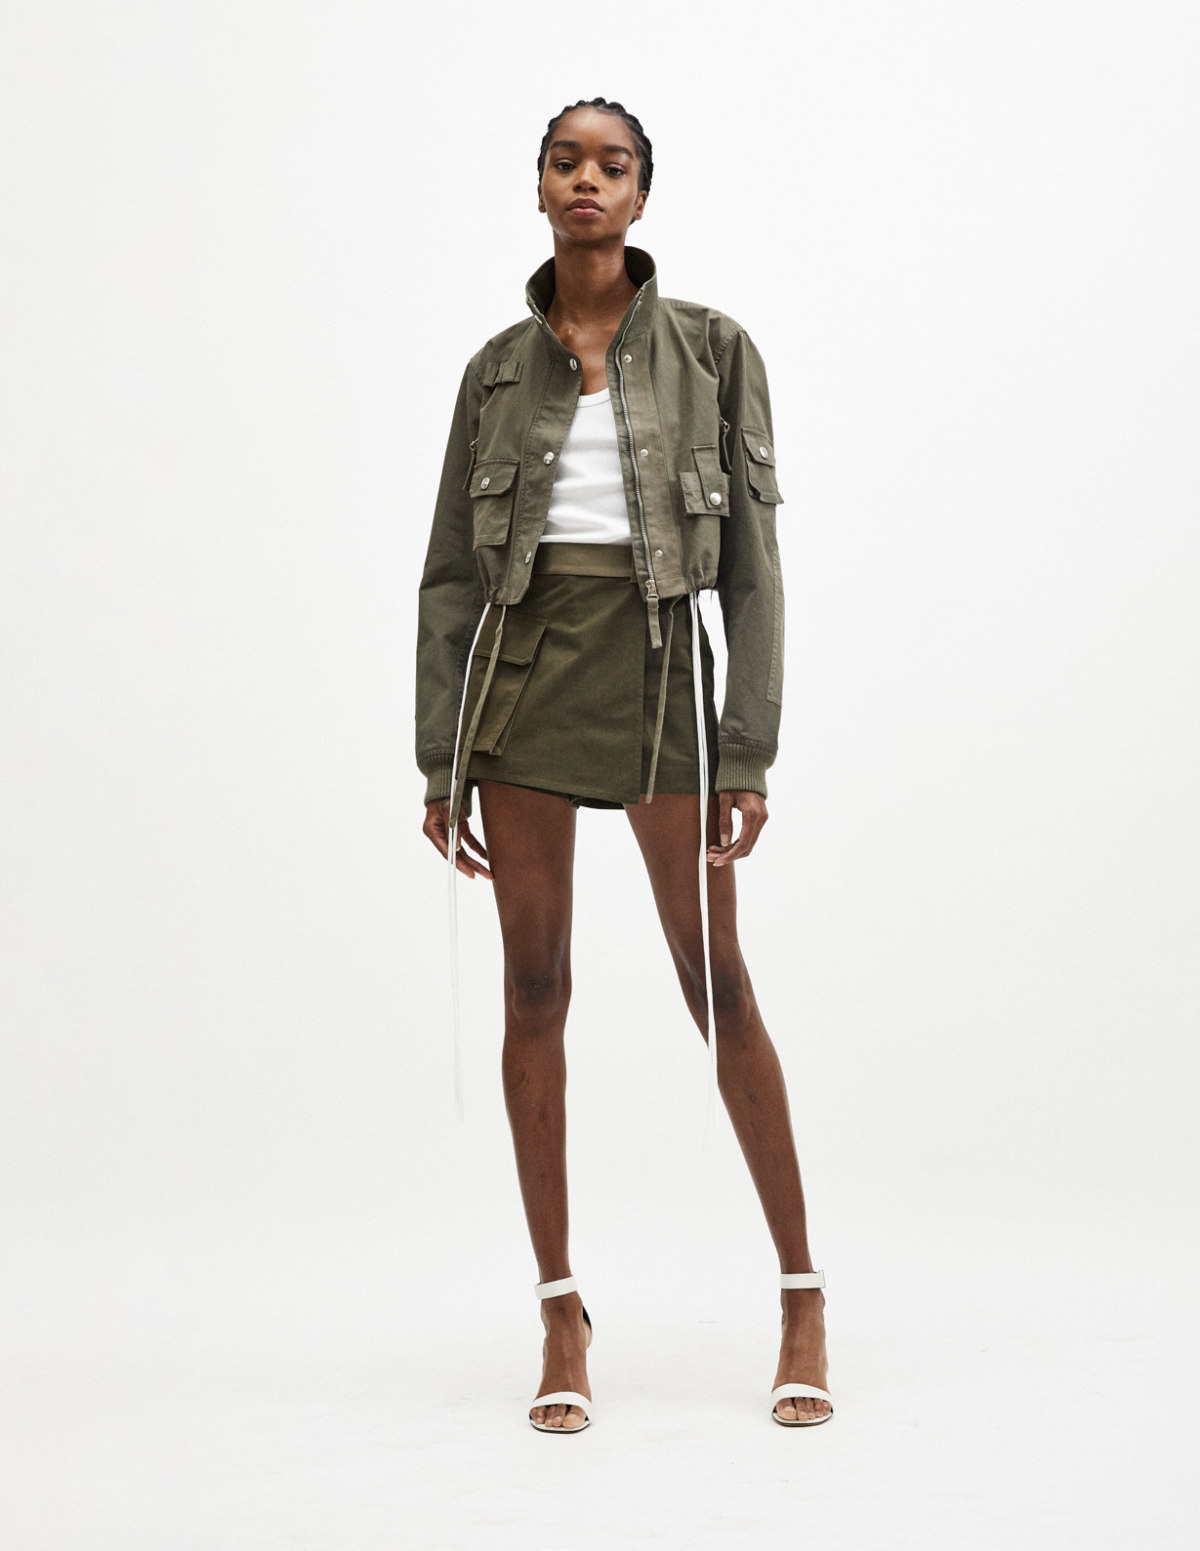 Helmut Lang Presents Its Pre-Fall 2021 Collection